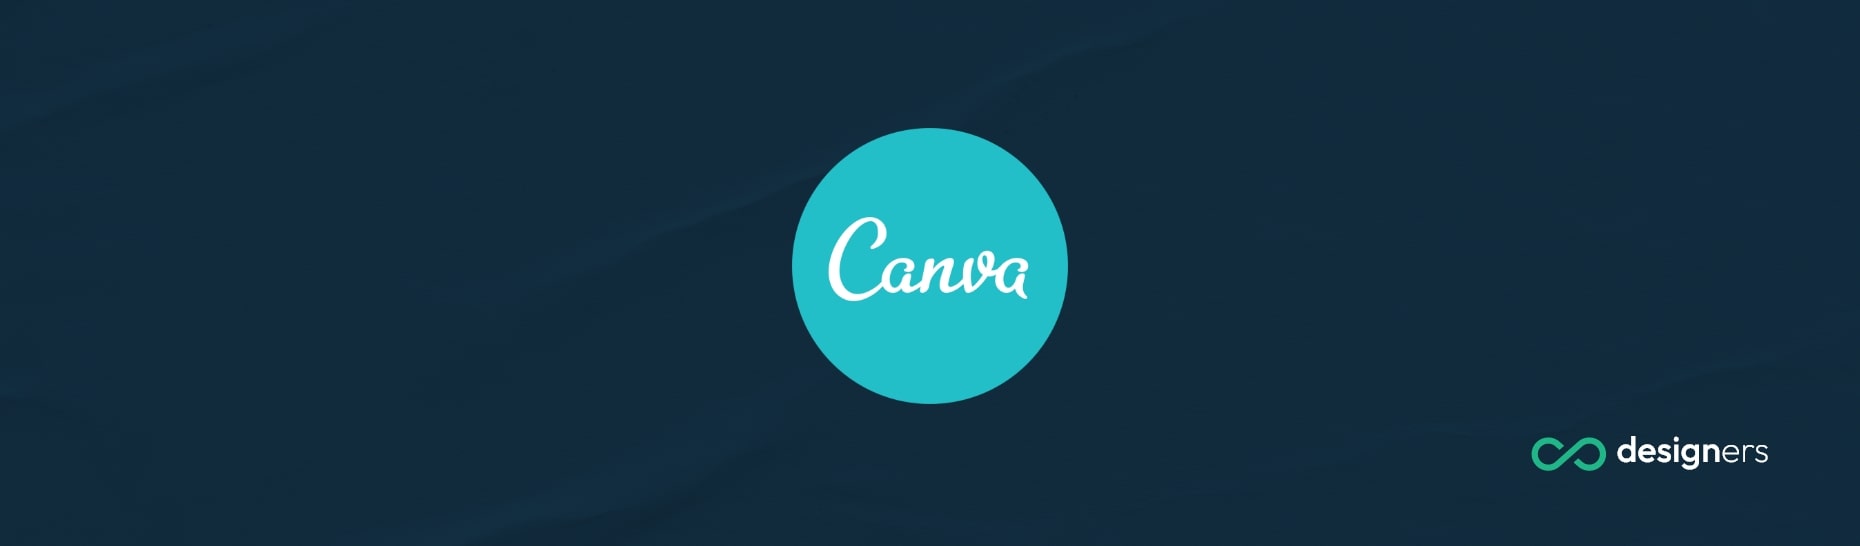 Why Was Canva So Successful?